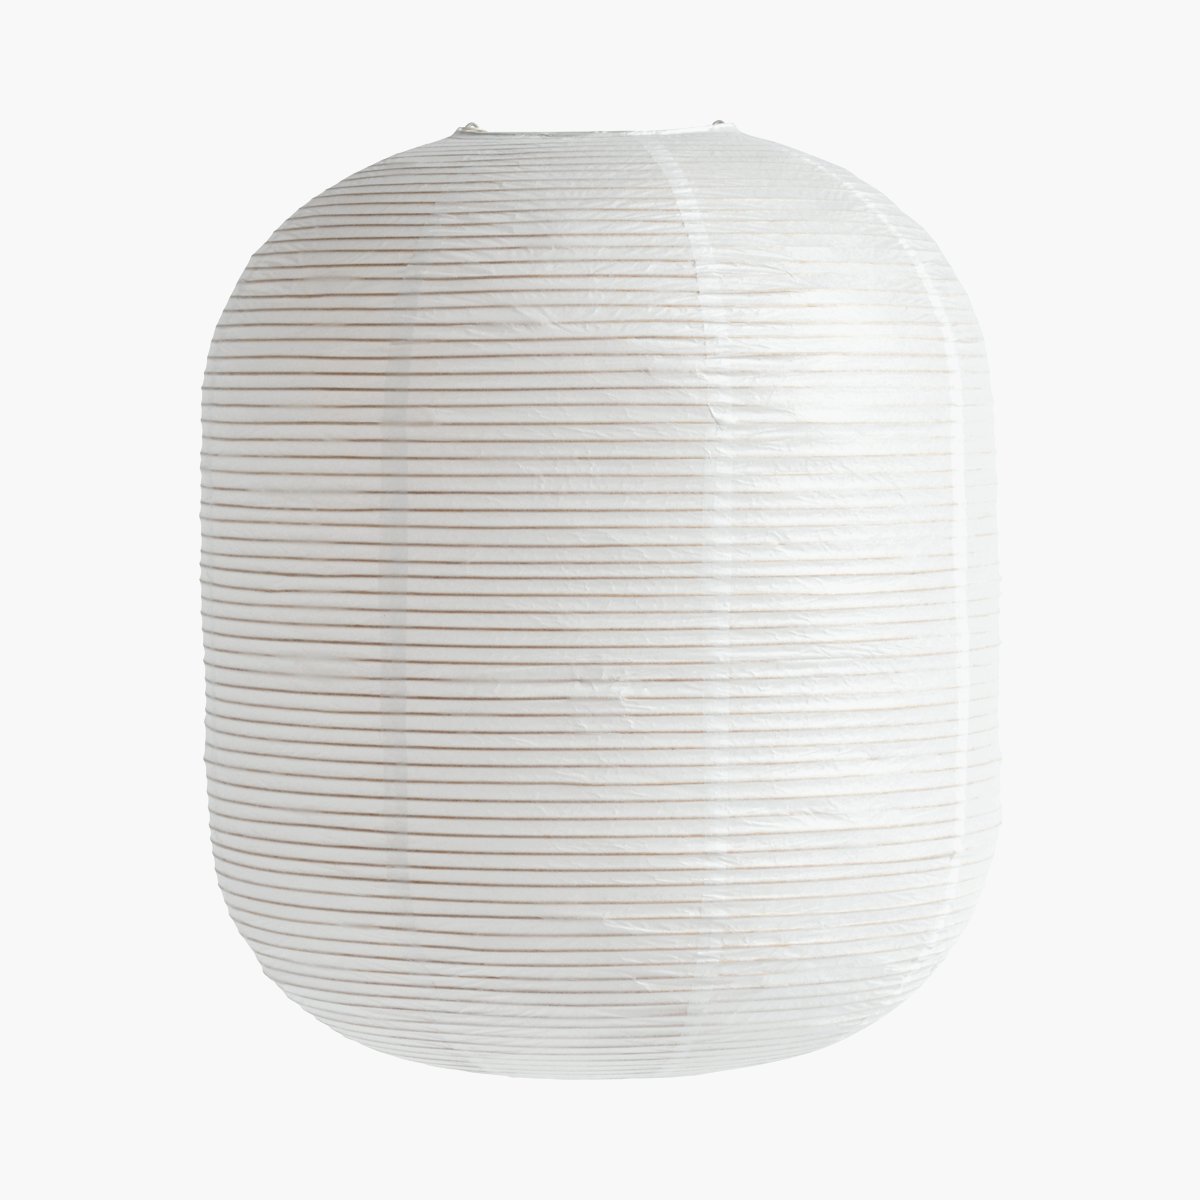 Common Rice Paper Shade